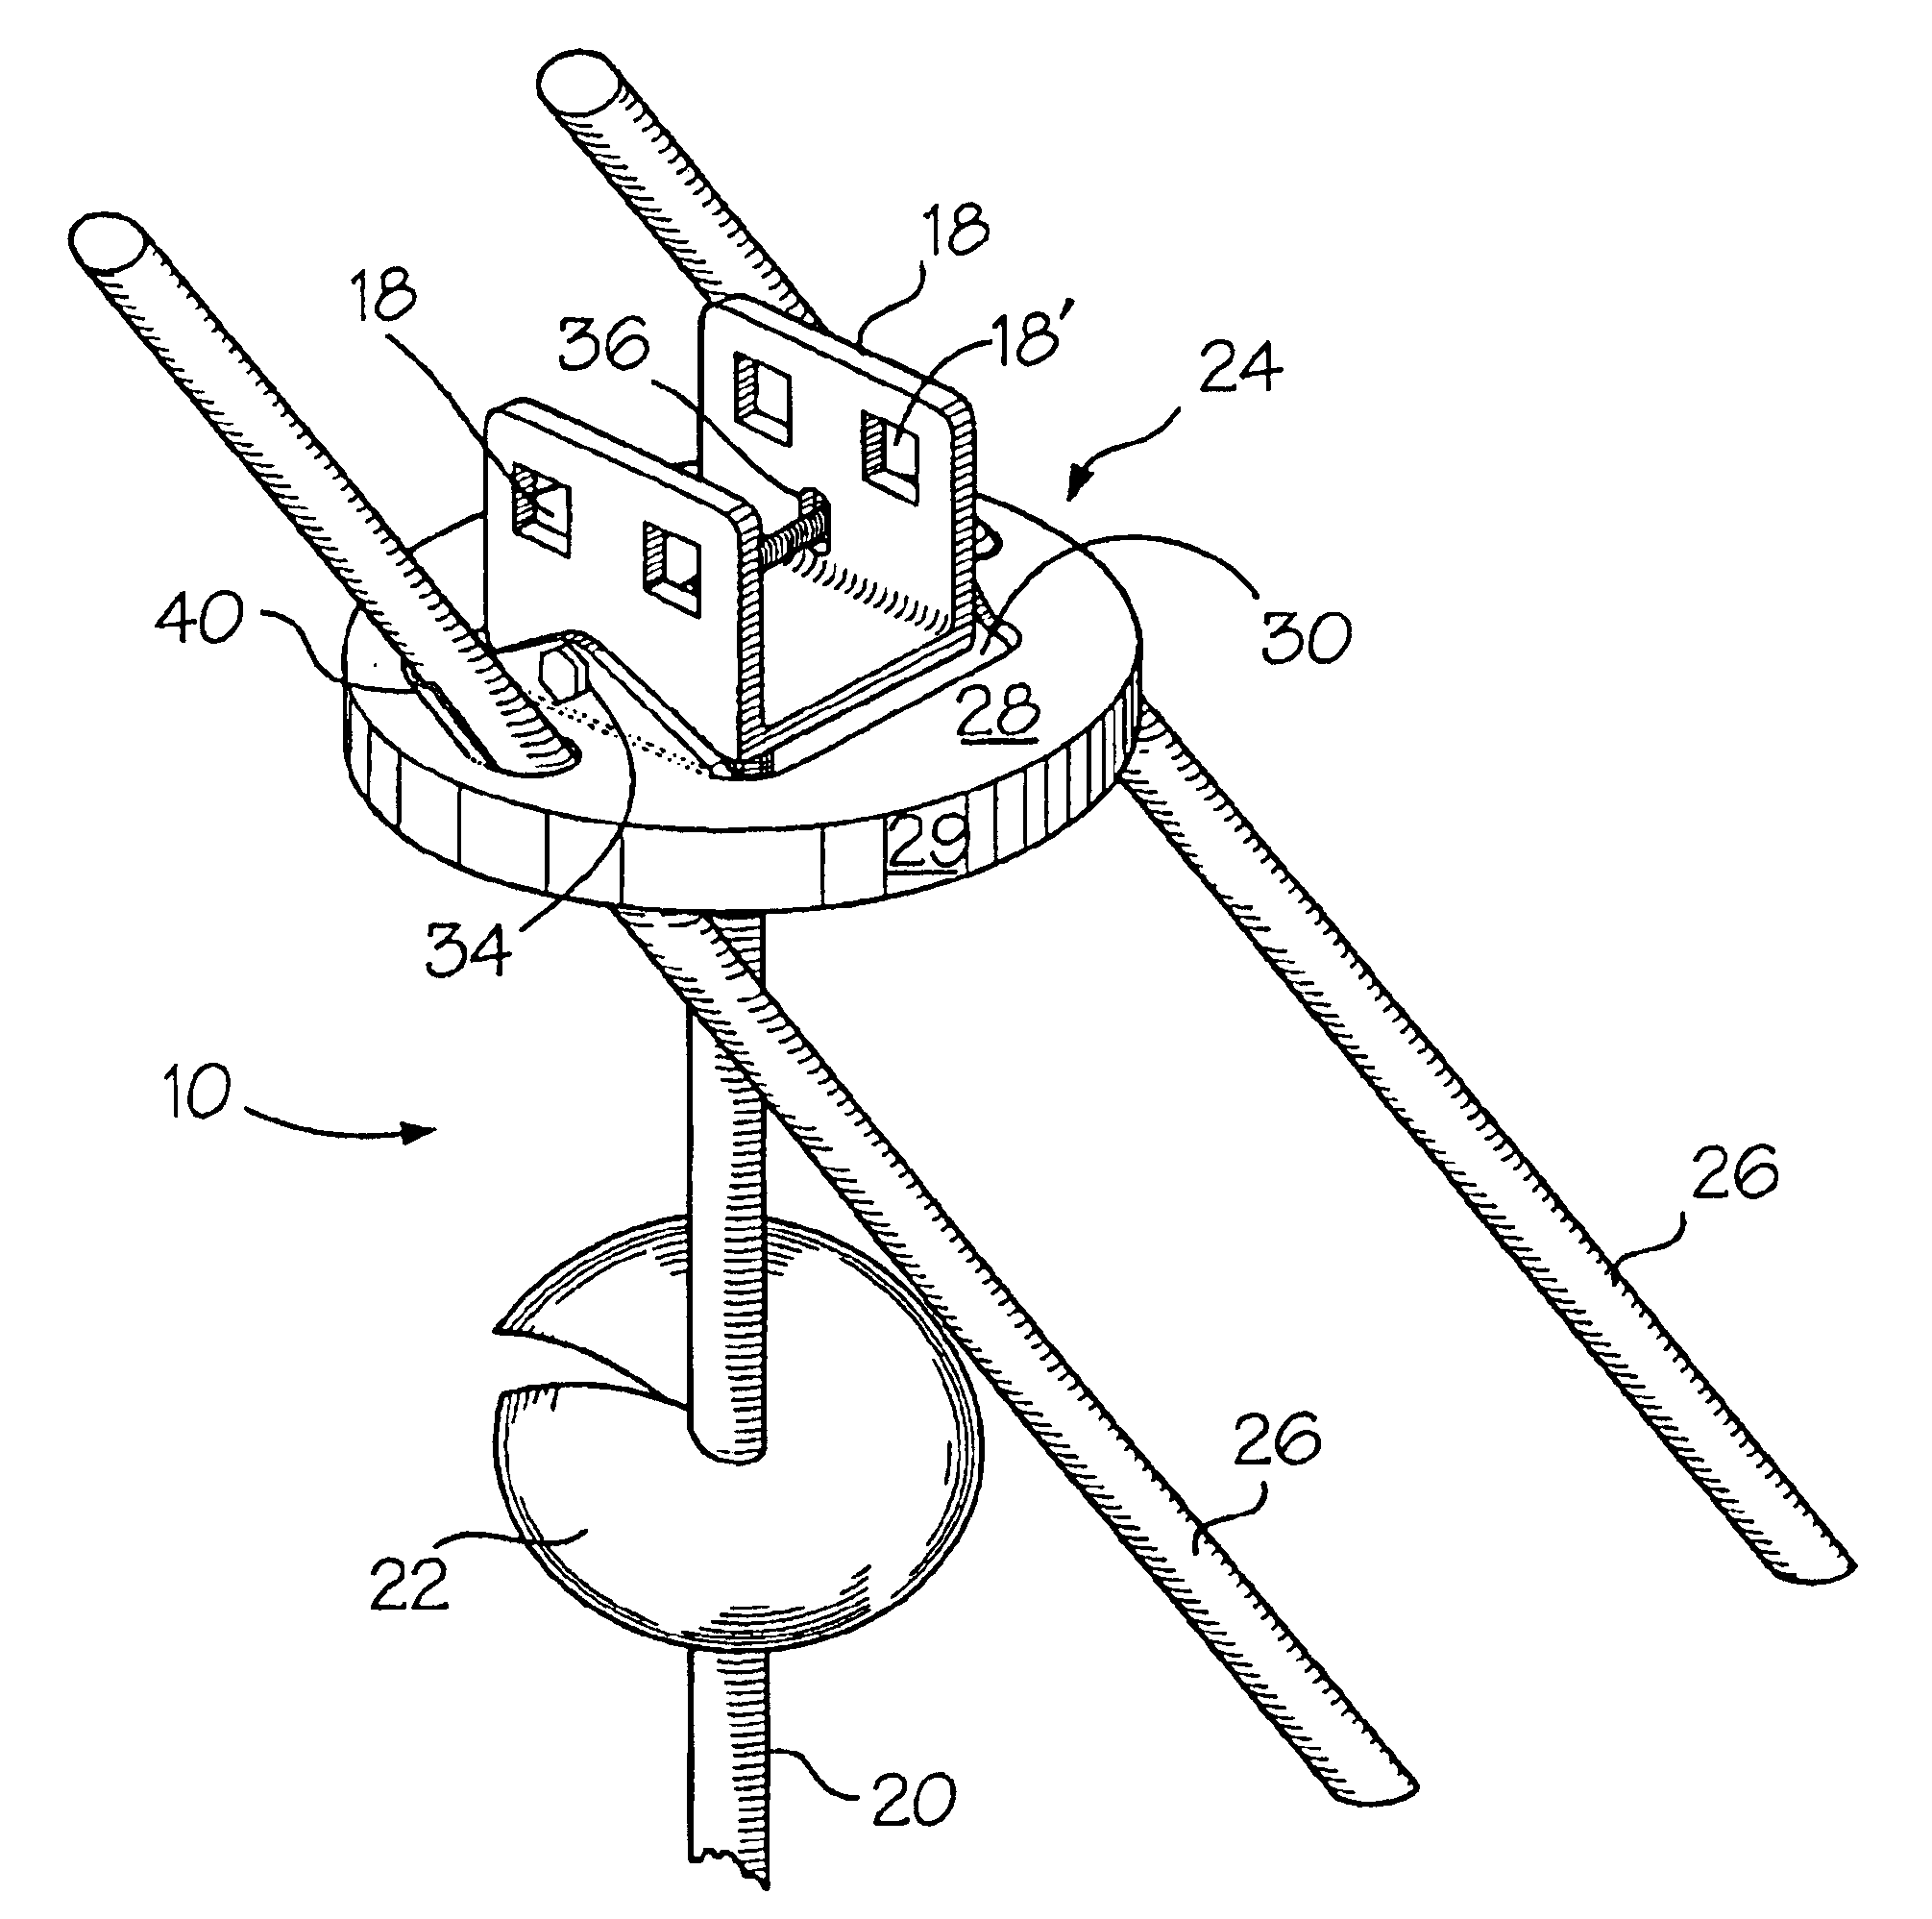 Drive/auger anchor and stabilizer